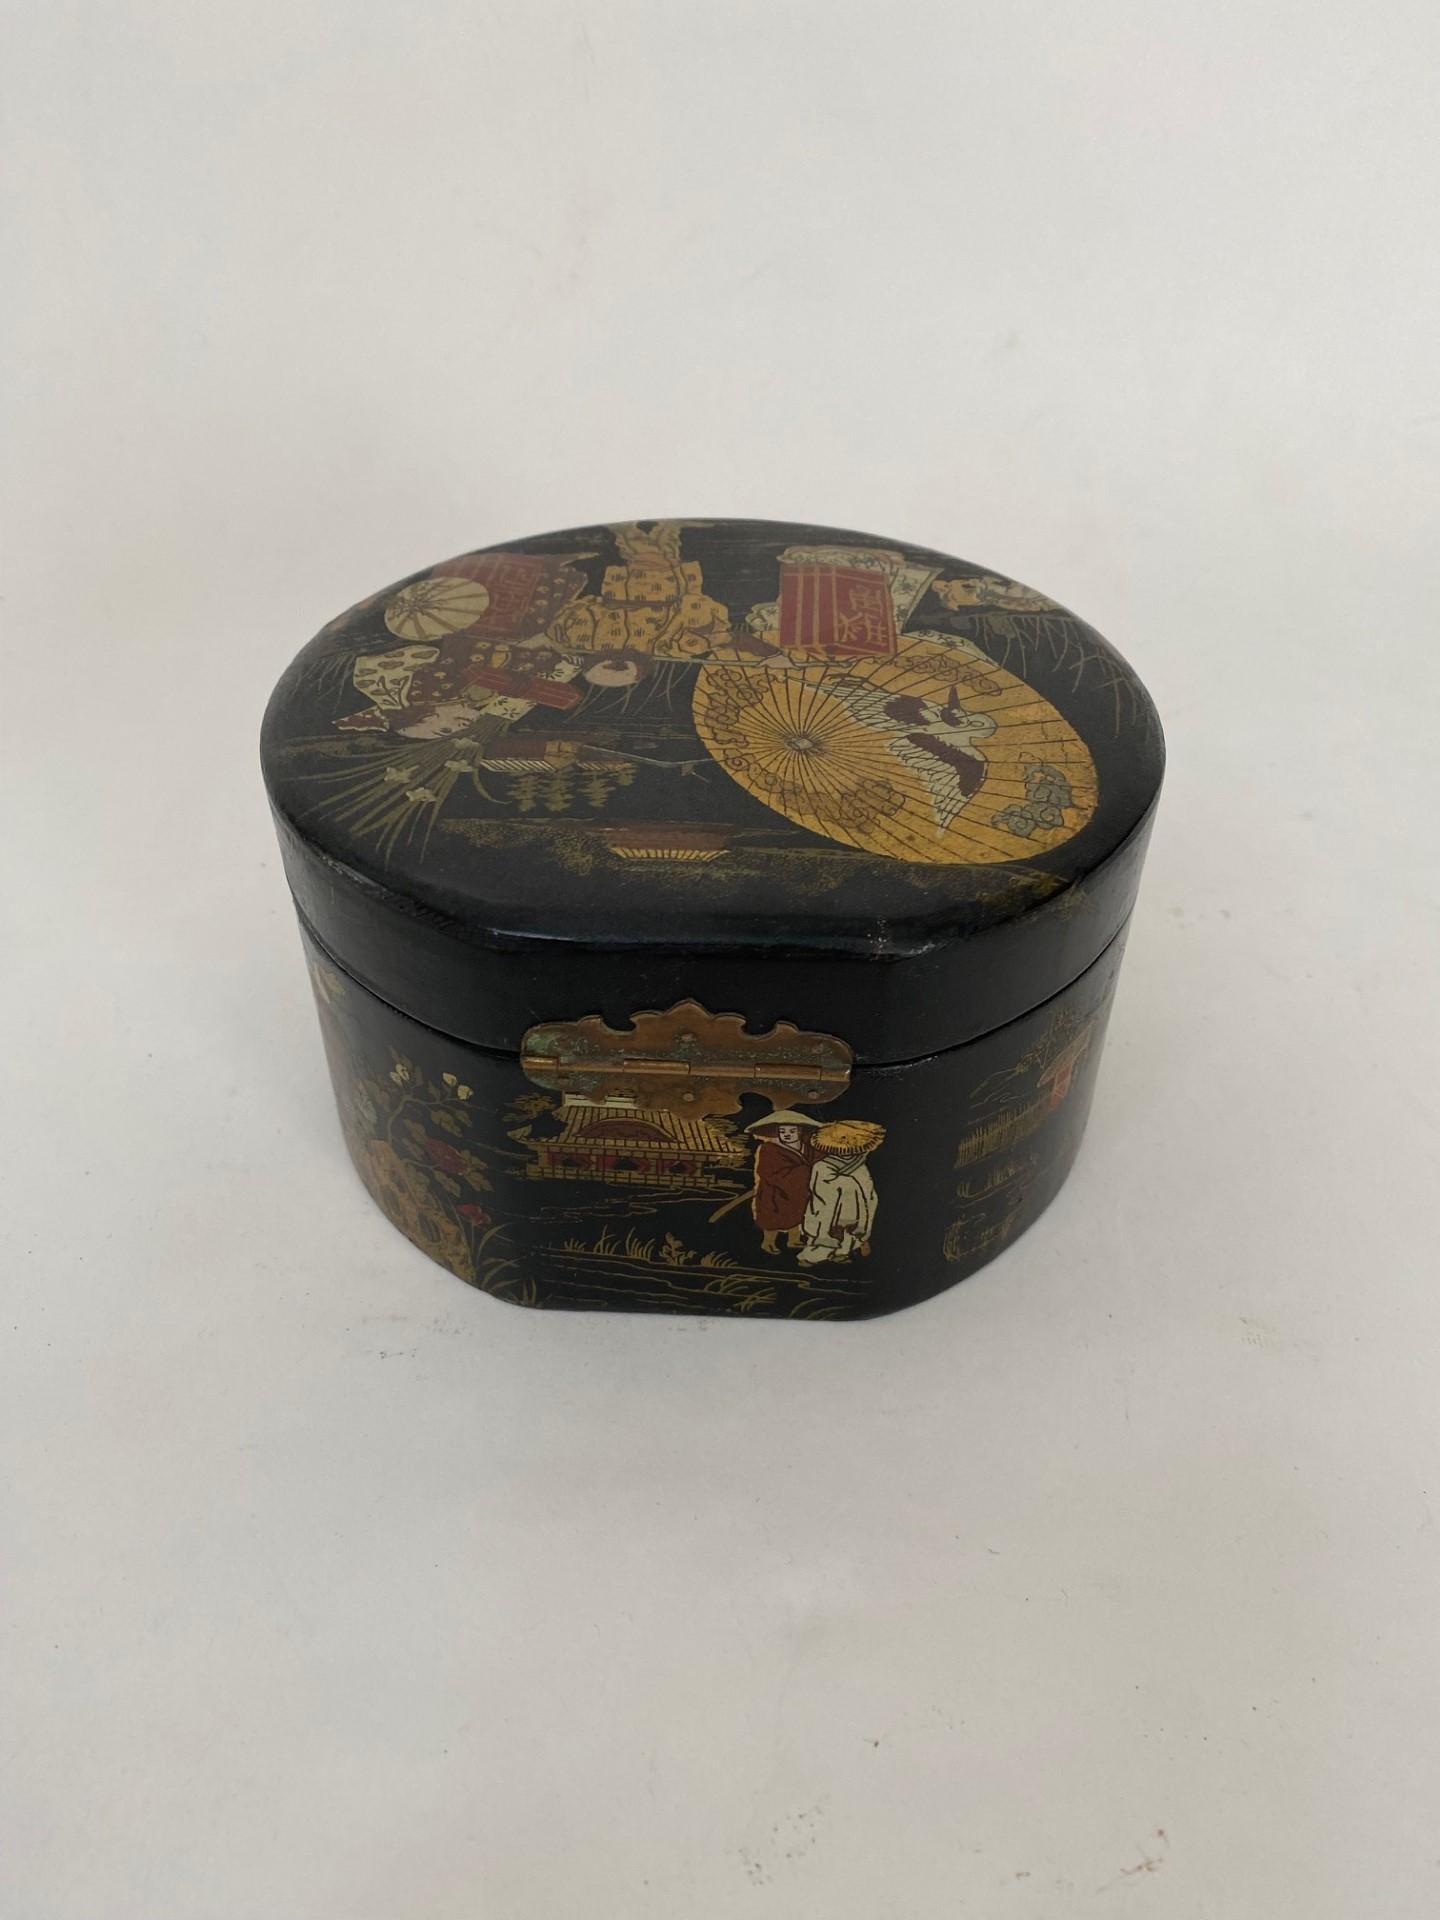 Old Japanese Black Lacquered Decorative Round Papier Mache Box with Hinged Top In Good Condition For Sale In North Salem, NY